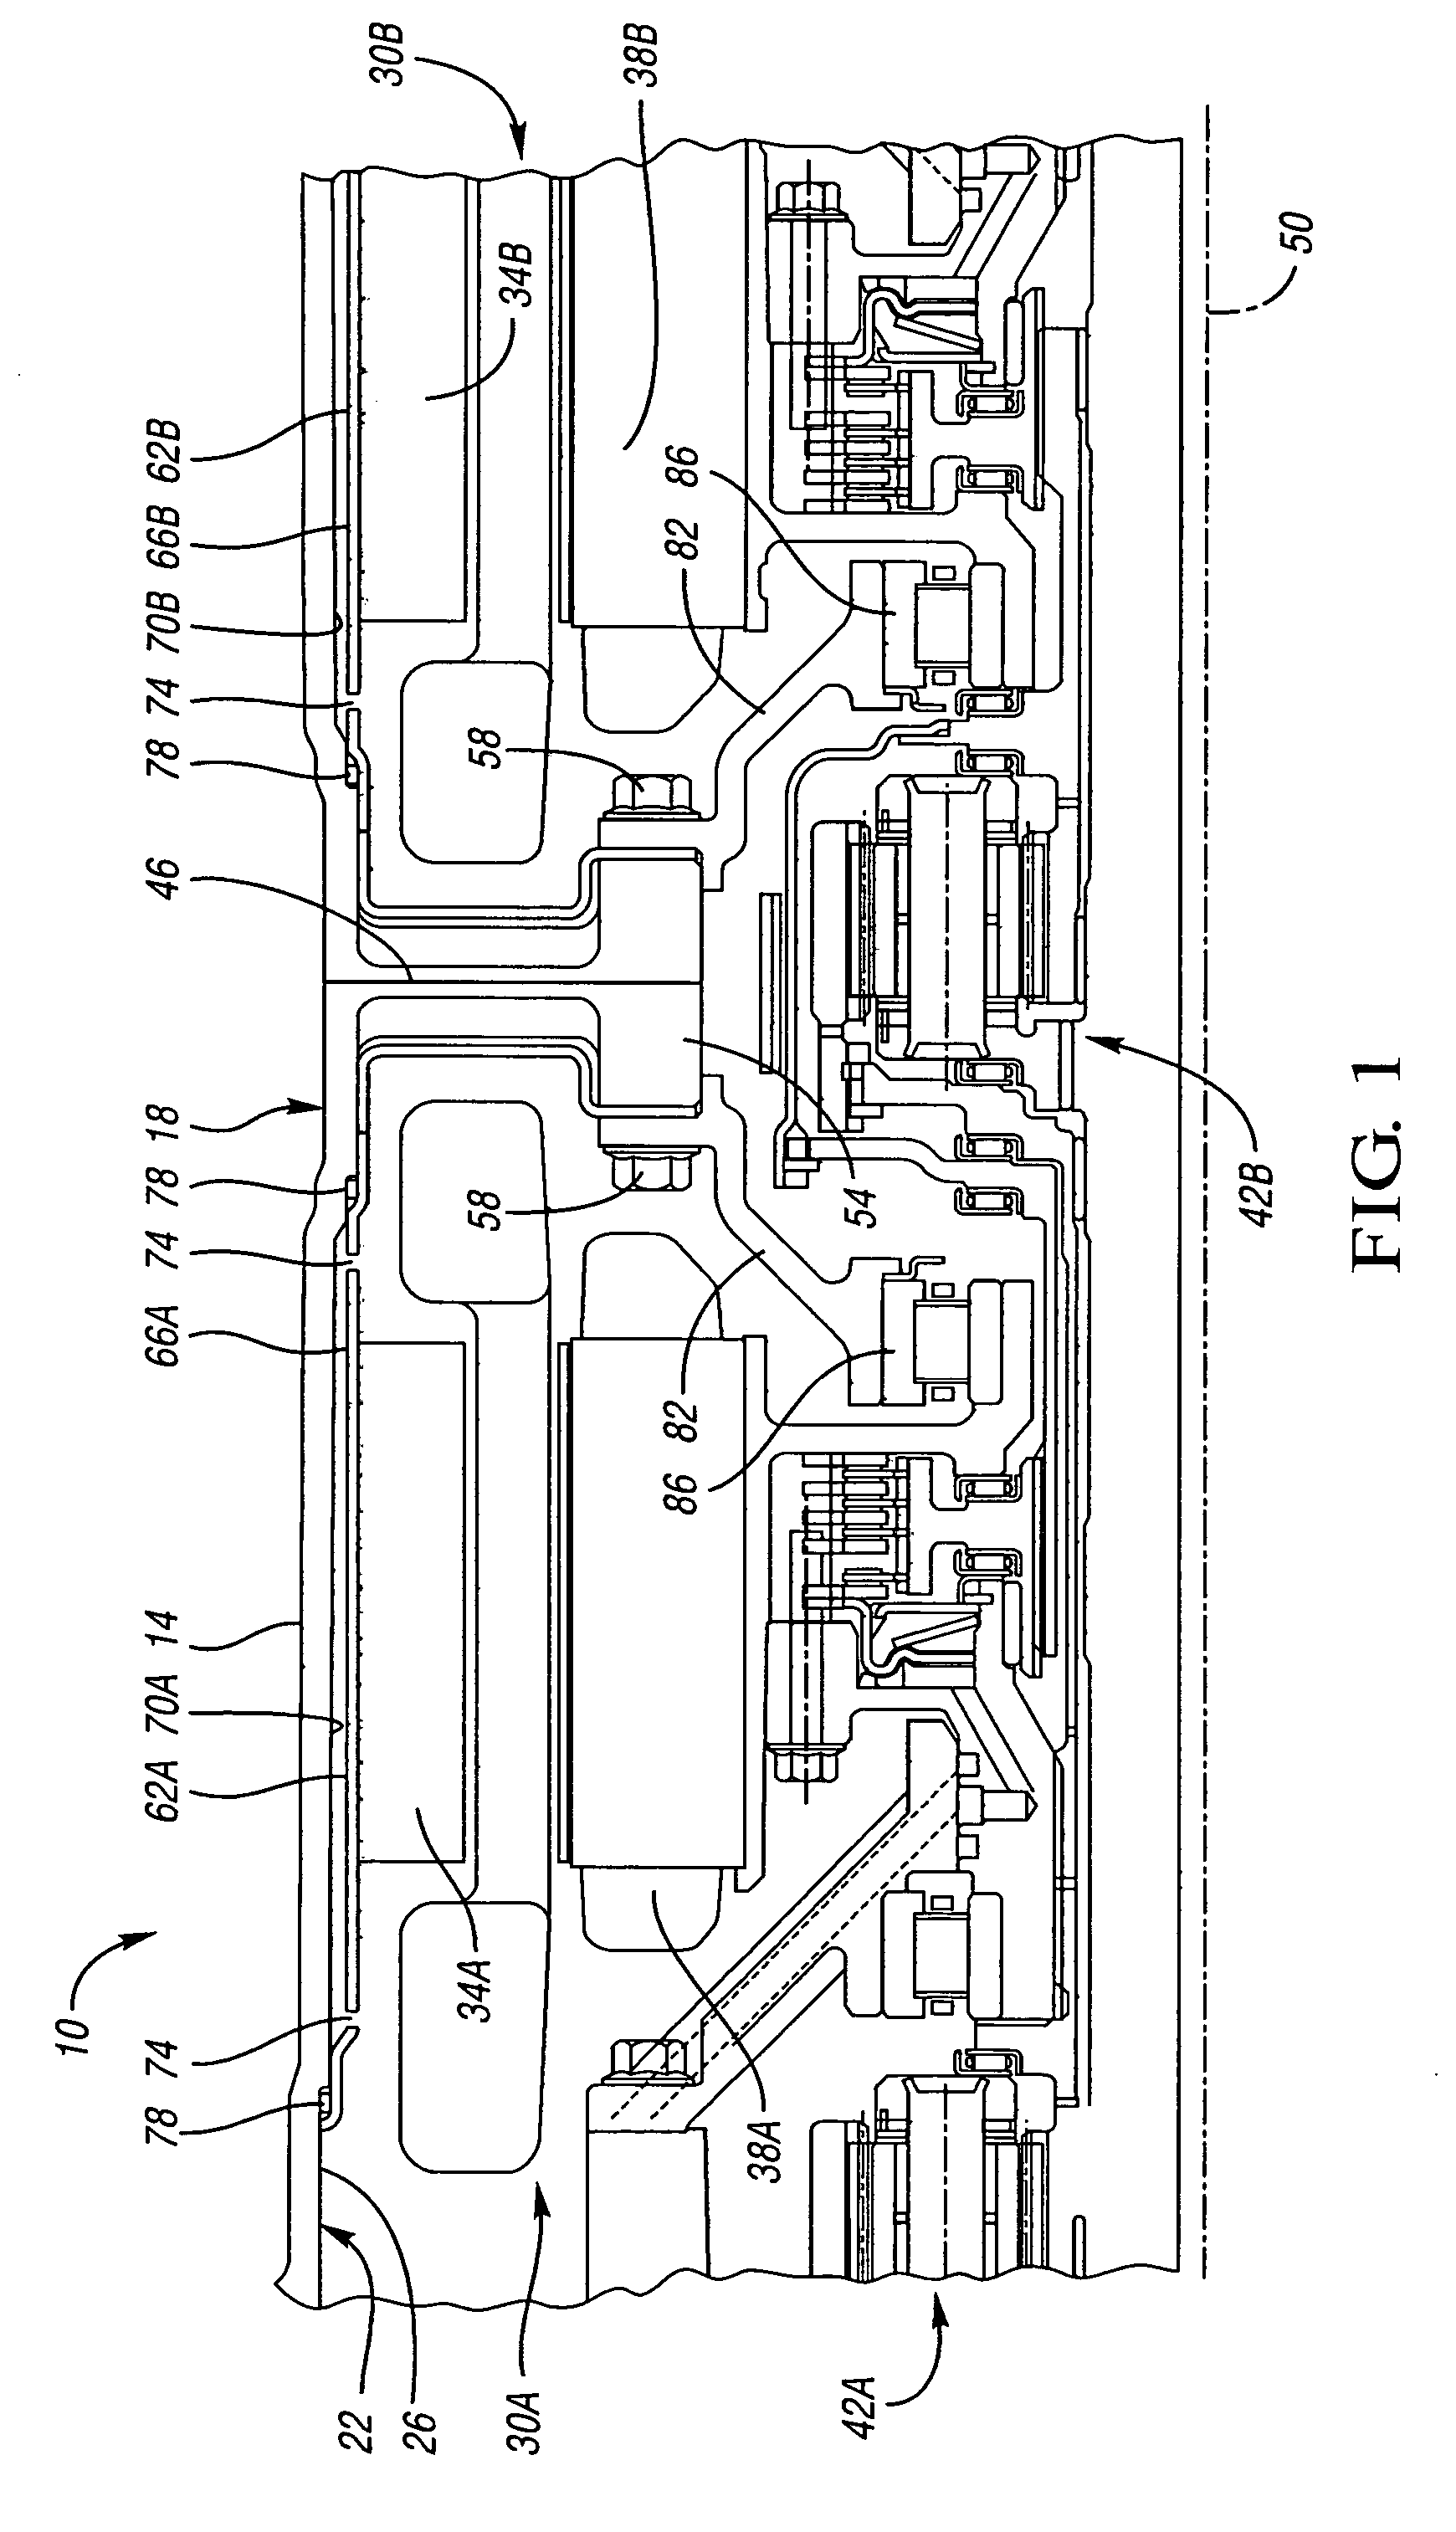 Electrically variable transmission